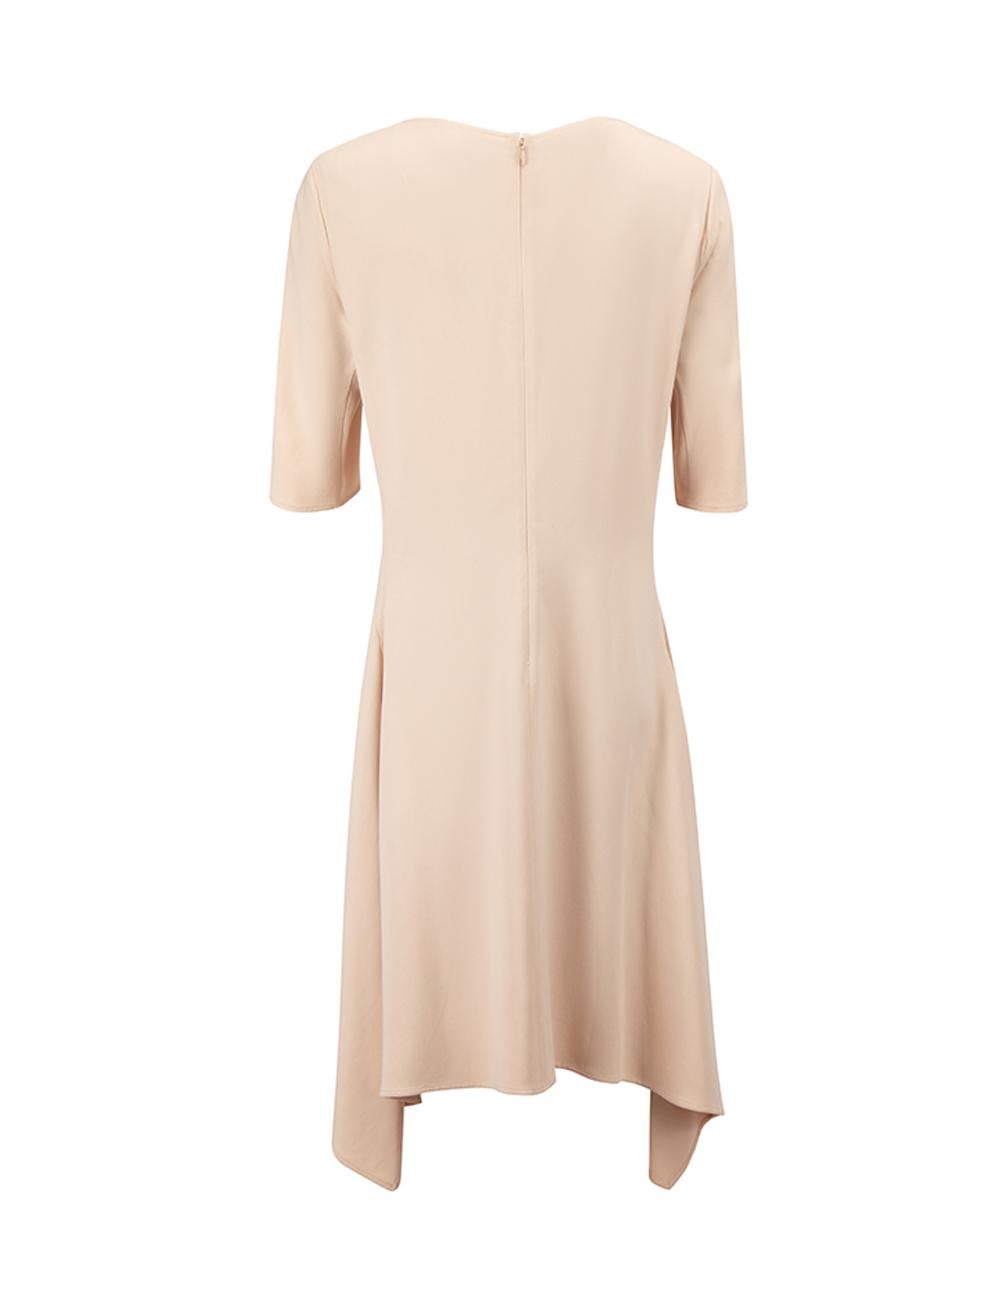 Stella McCartney Women's Pink Draped Knee Length Dress In Good Condition For Sale In London, GB